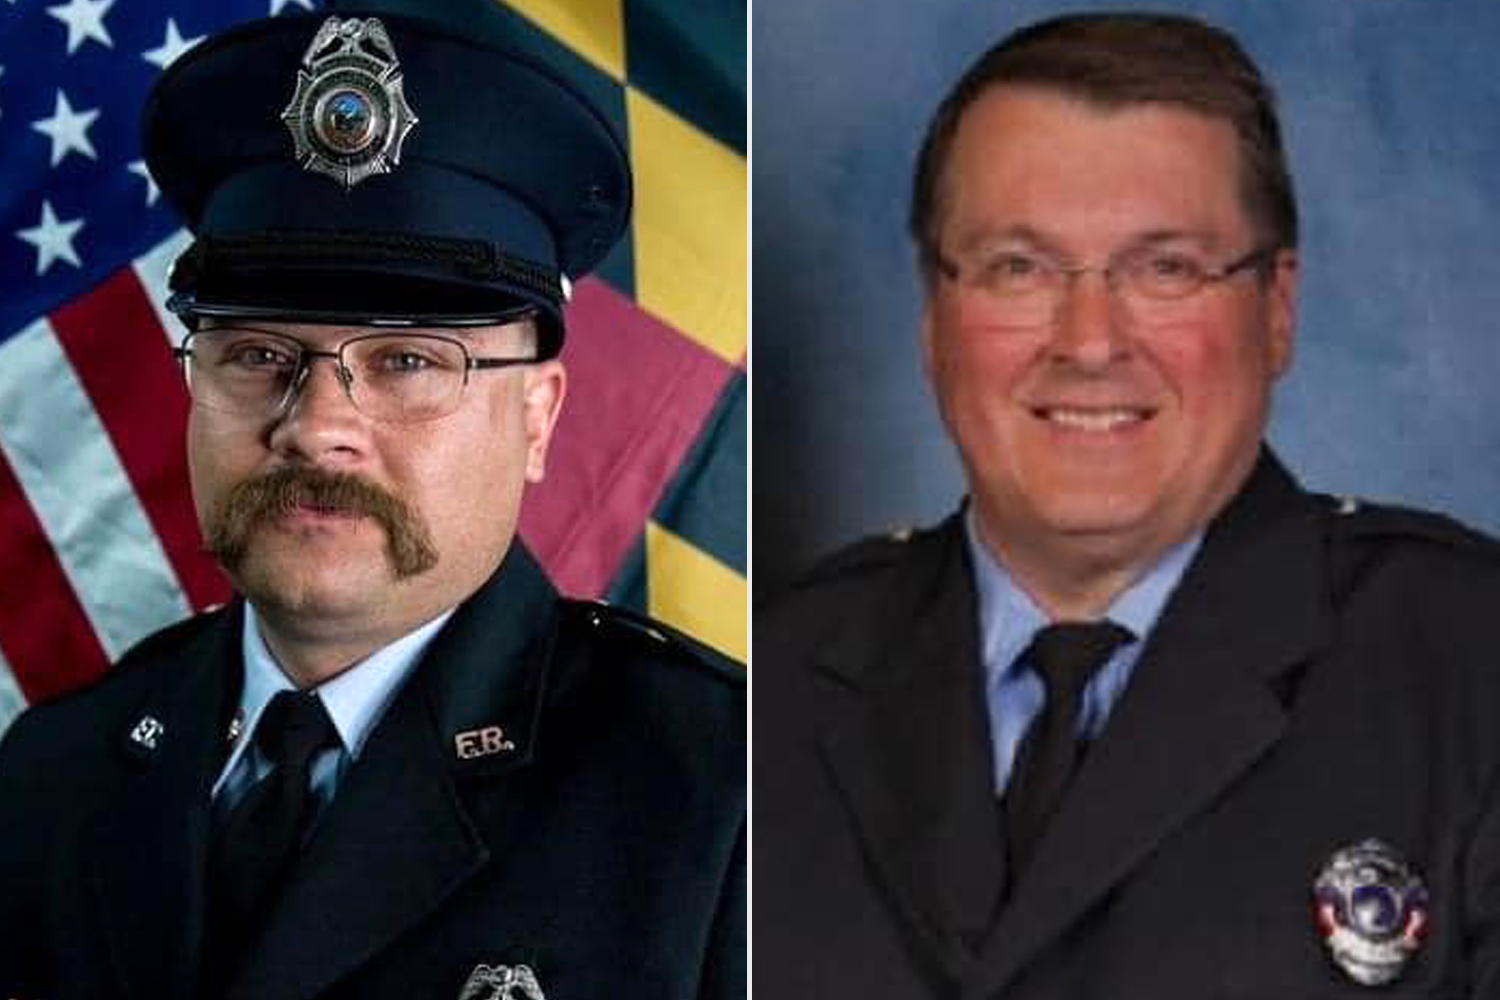 Assistant Fire Chief Zachary Paris, 36, and Firefighter Marvin Gruber, 59